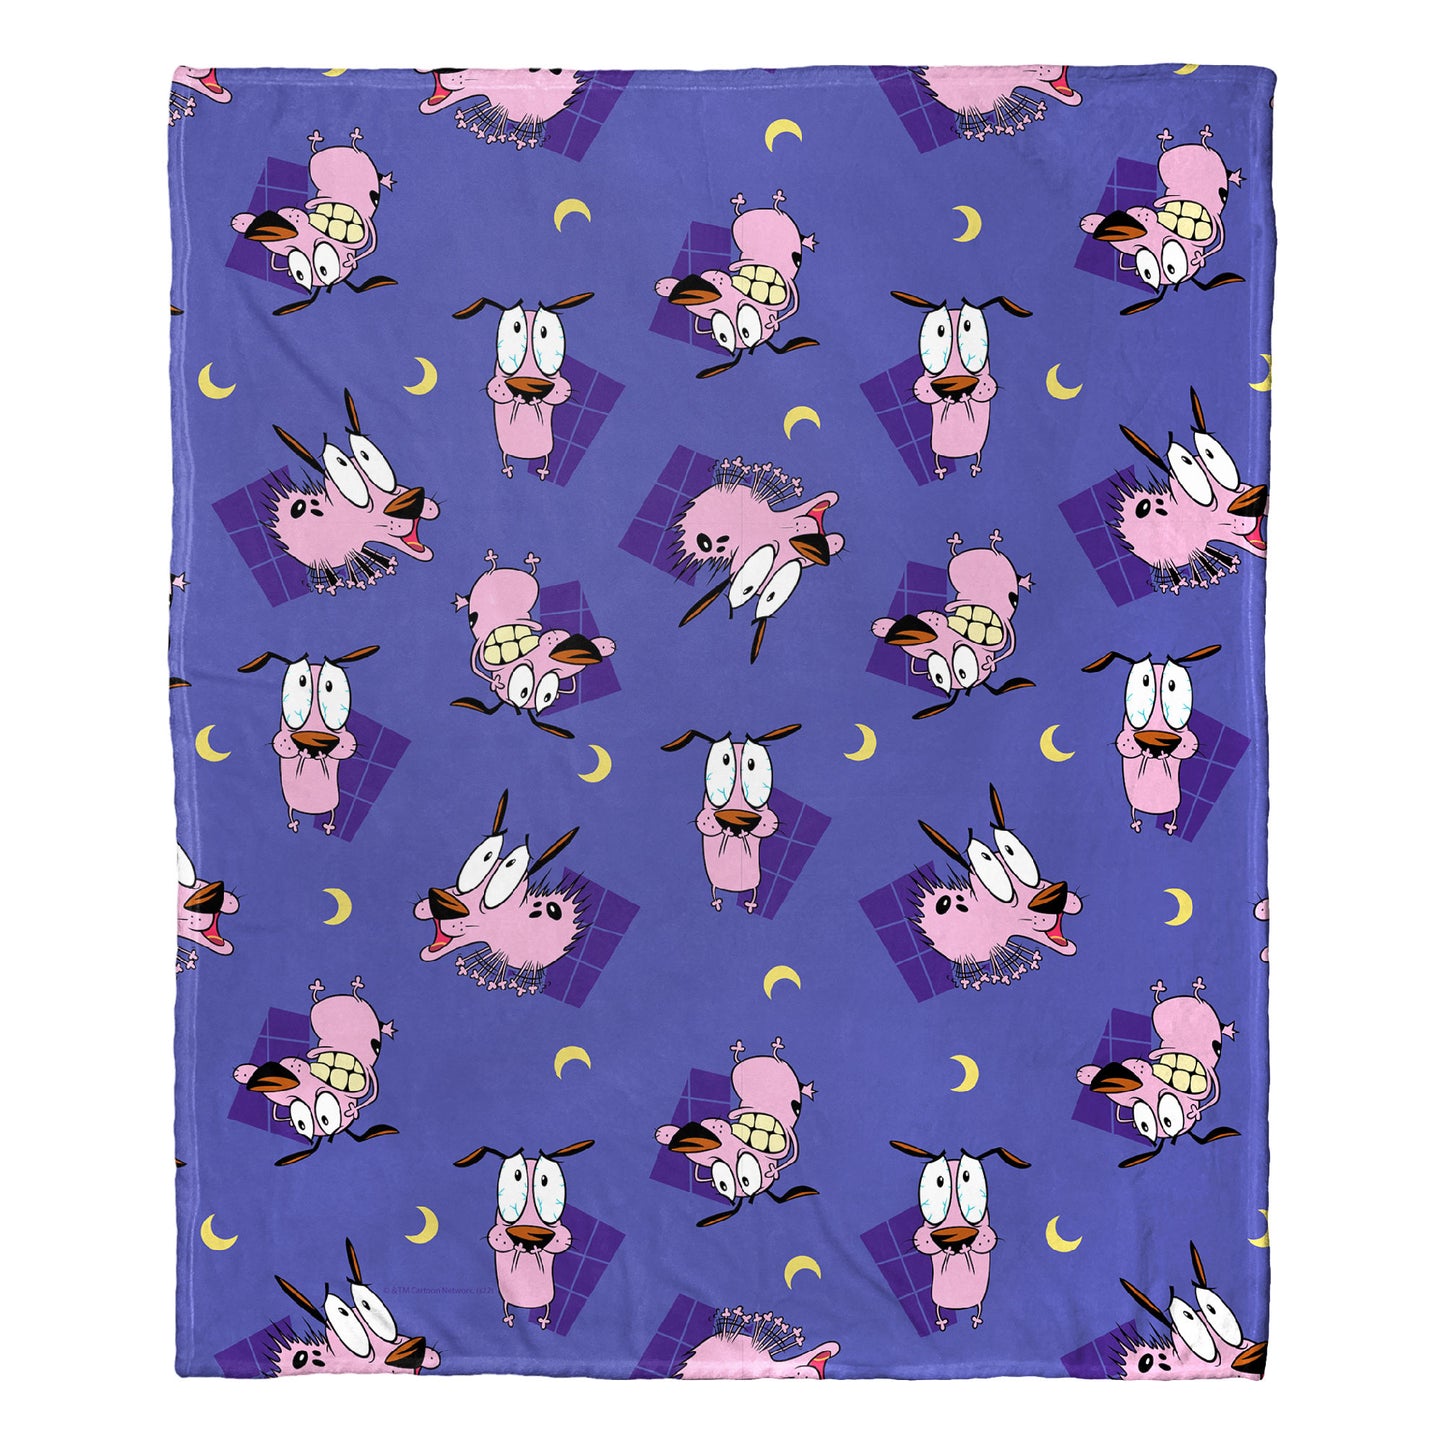 Cartoon Network's Courage the Cowardly Dog Night Terrors Throw Blanket 50"x60"